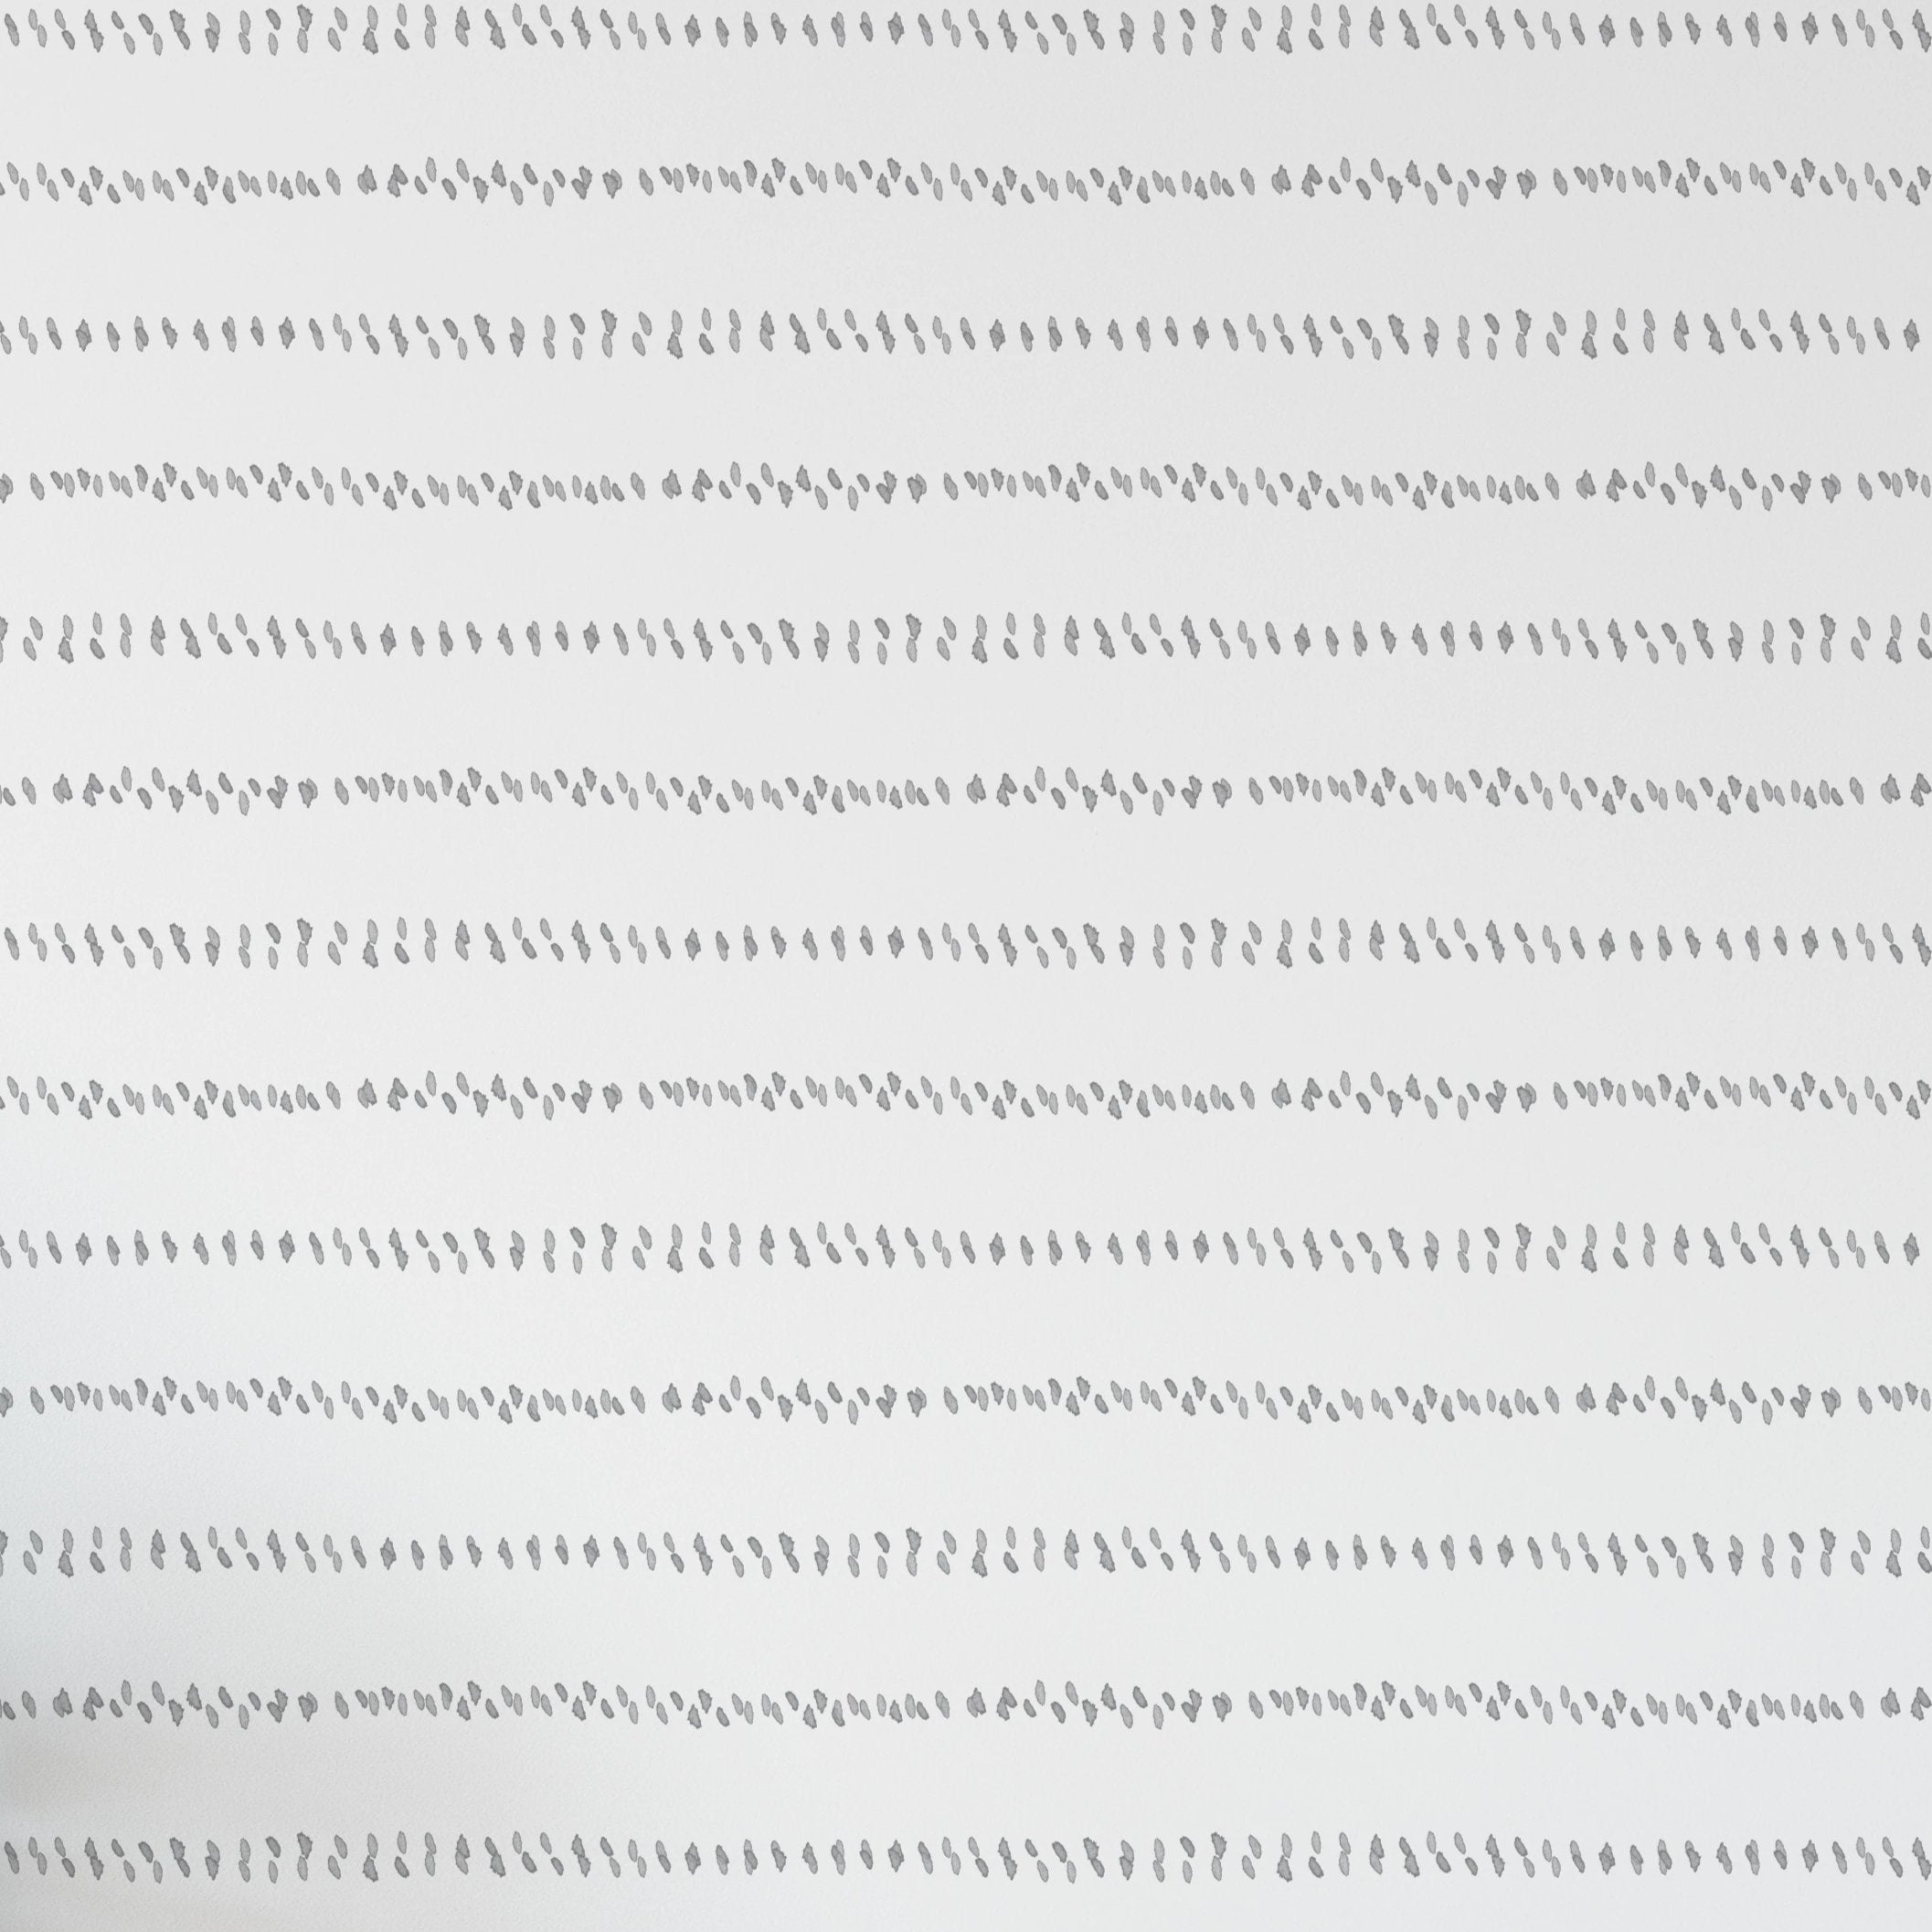 A seamless pattern of delicate, hand-painted watercolor dashes in grayscale, aligned in horizontal stripes across a white background. The brush strokes give a soft, organic feel to the minimalist design.